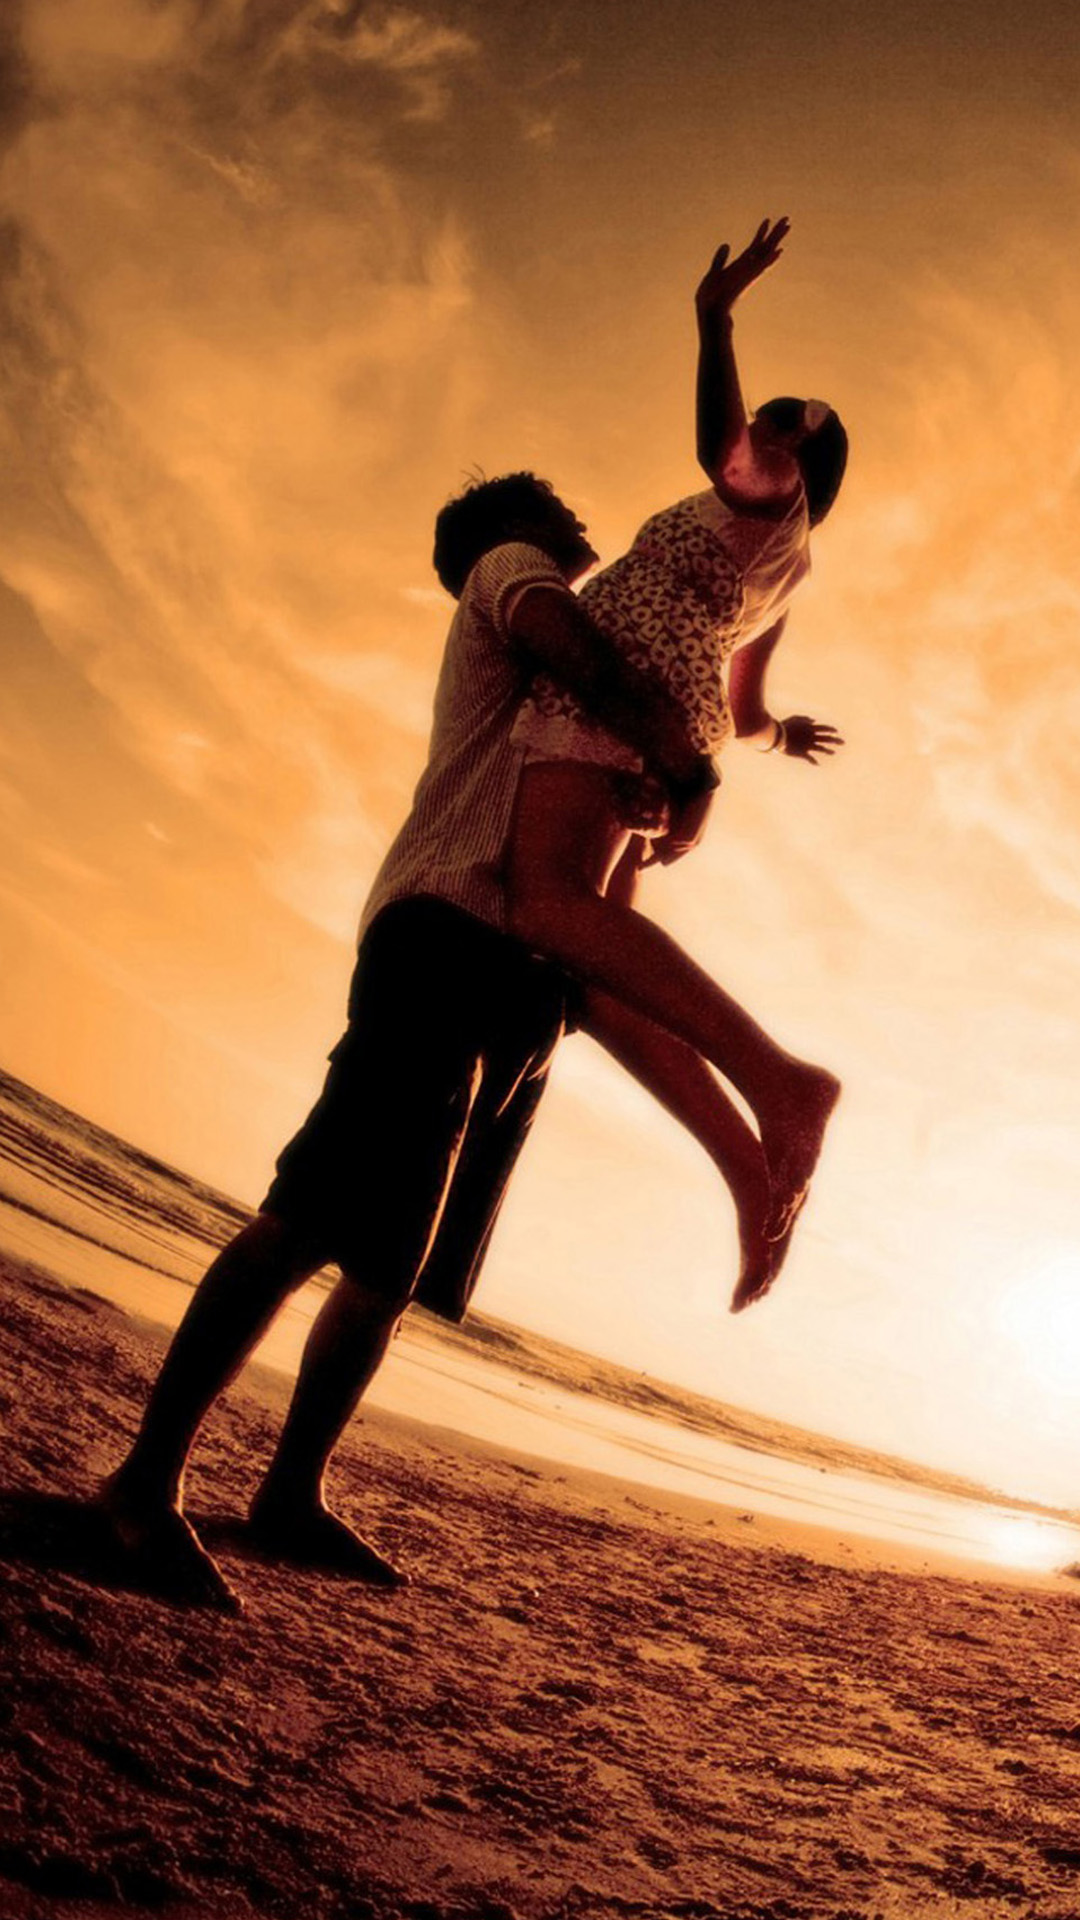 Beach Love Android wallpaper